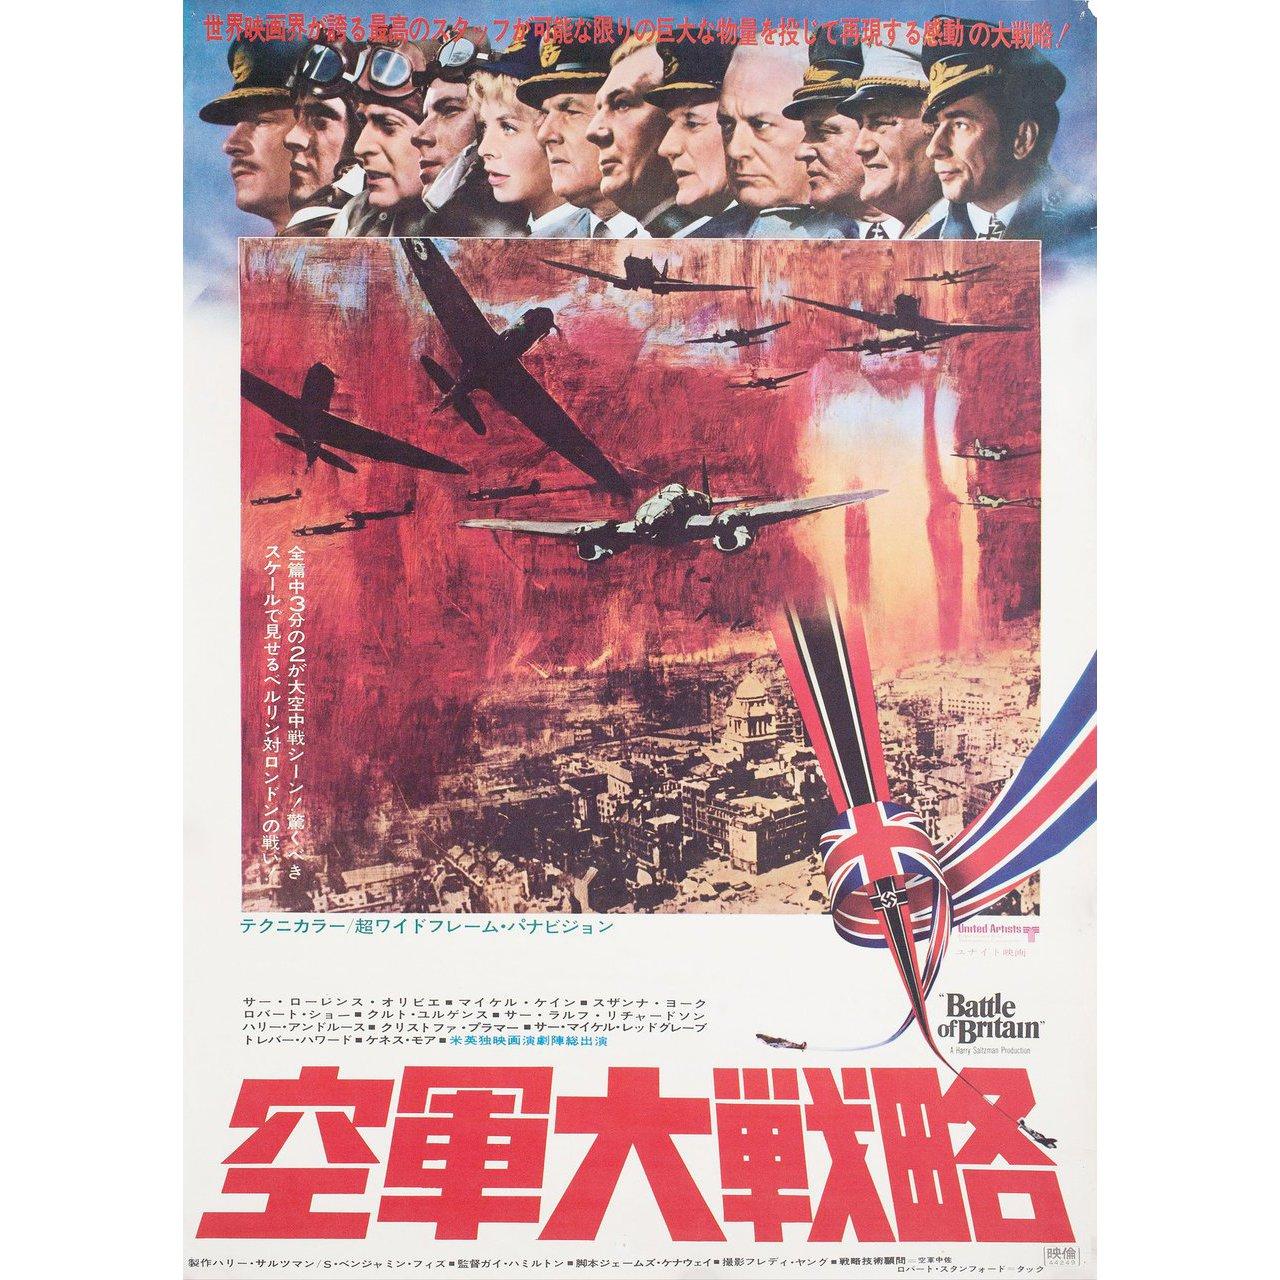 Original 1969 Japanese B2 poster for the film Battle of Britain directed by Guy Hamilton with Harry Andrews / Michael Caine / Trevor Howard / Curd Jurgens. Very good-fine condition, rolled. Please note: the size is stated in inches and the actual